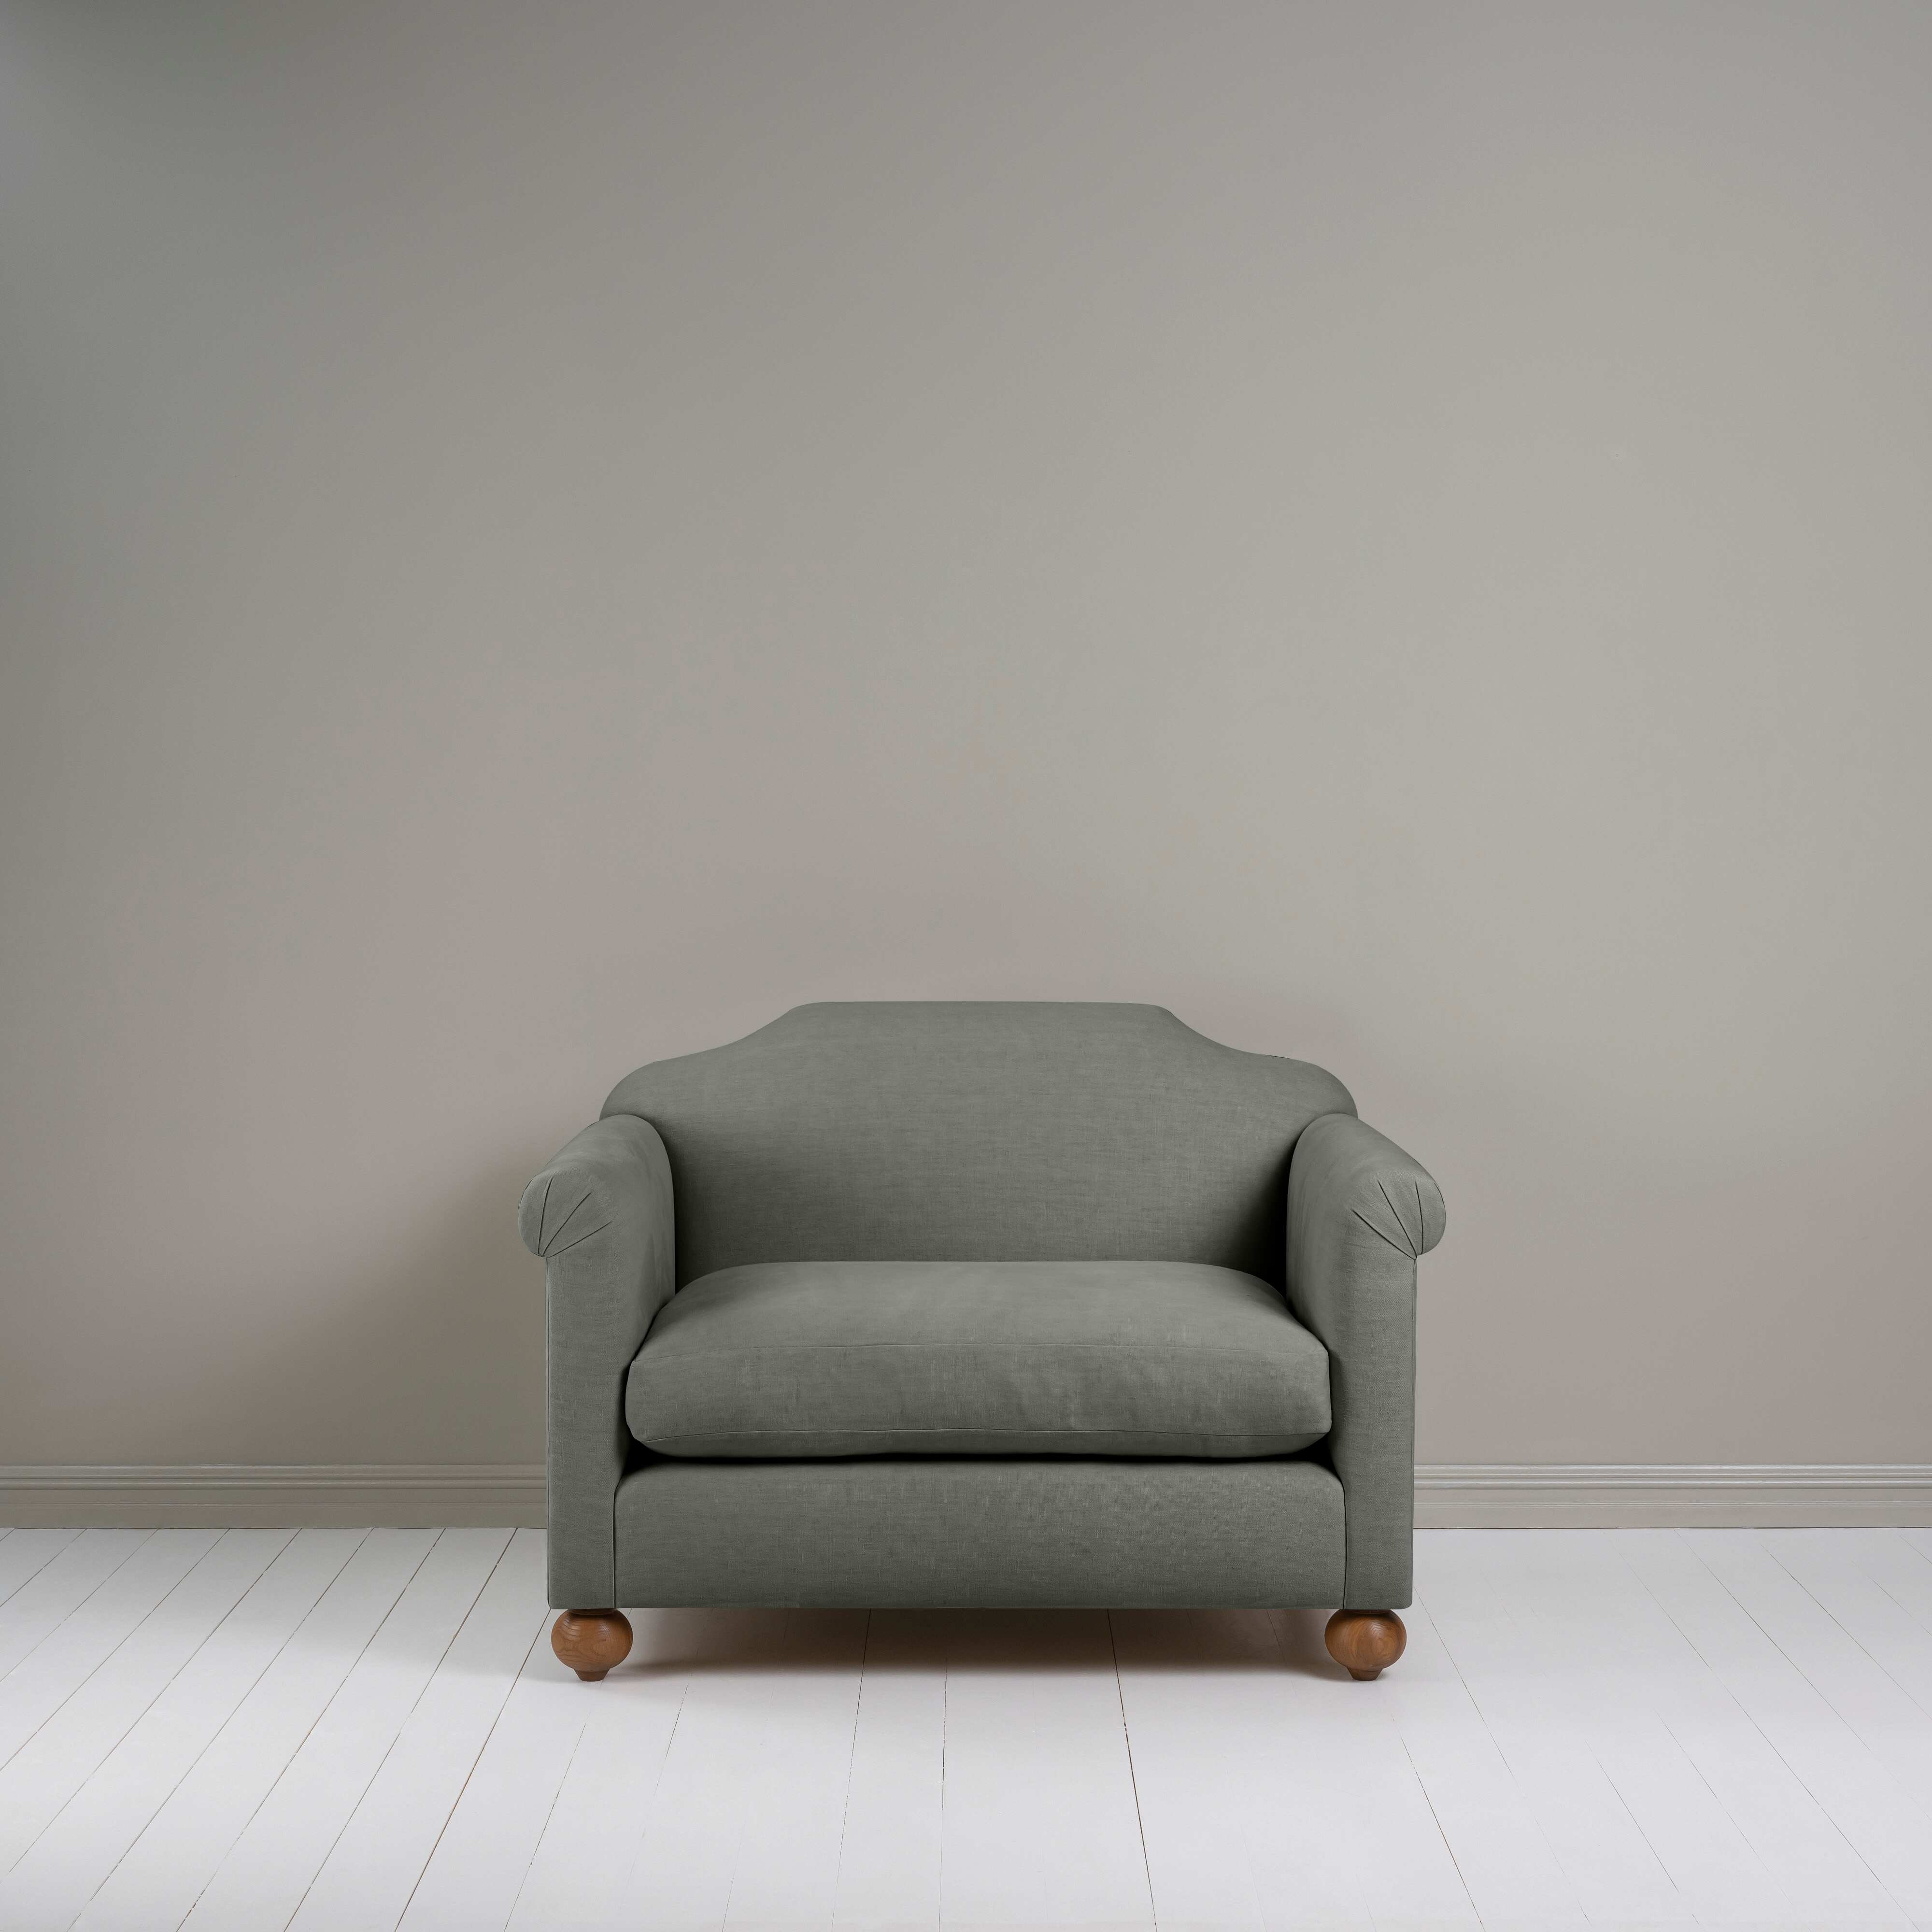  Dolittle Love Seat in Laidback Linen Shadow 